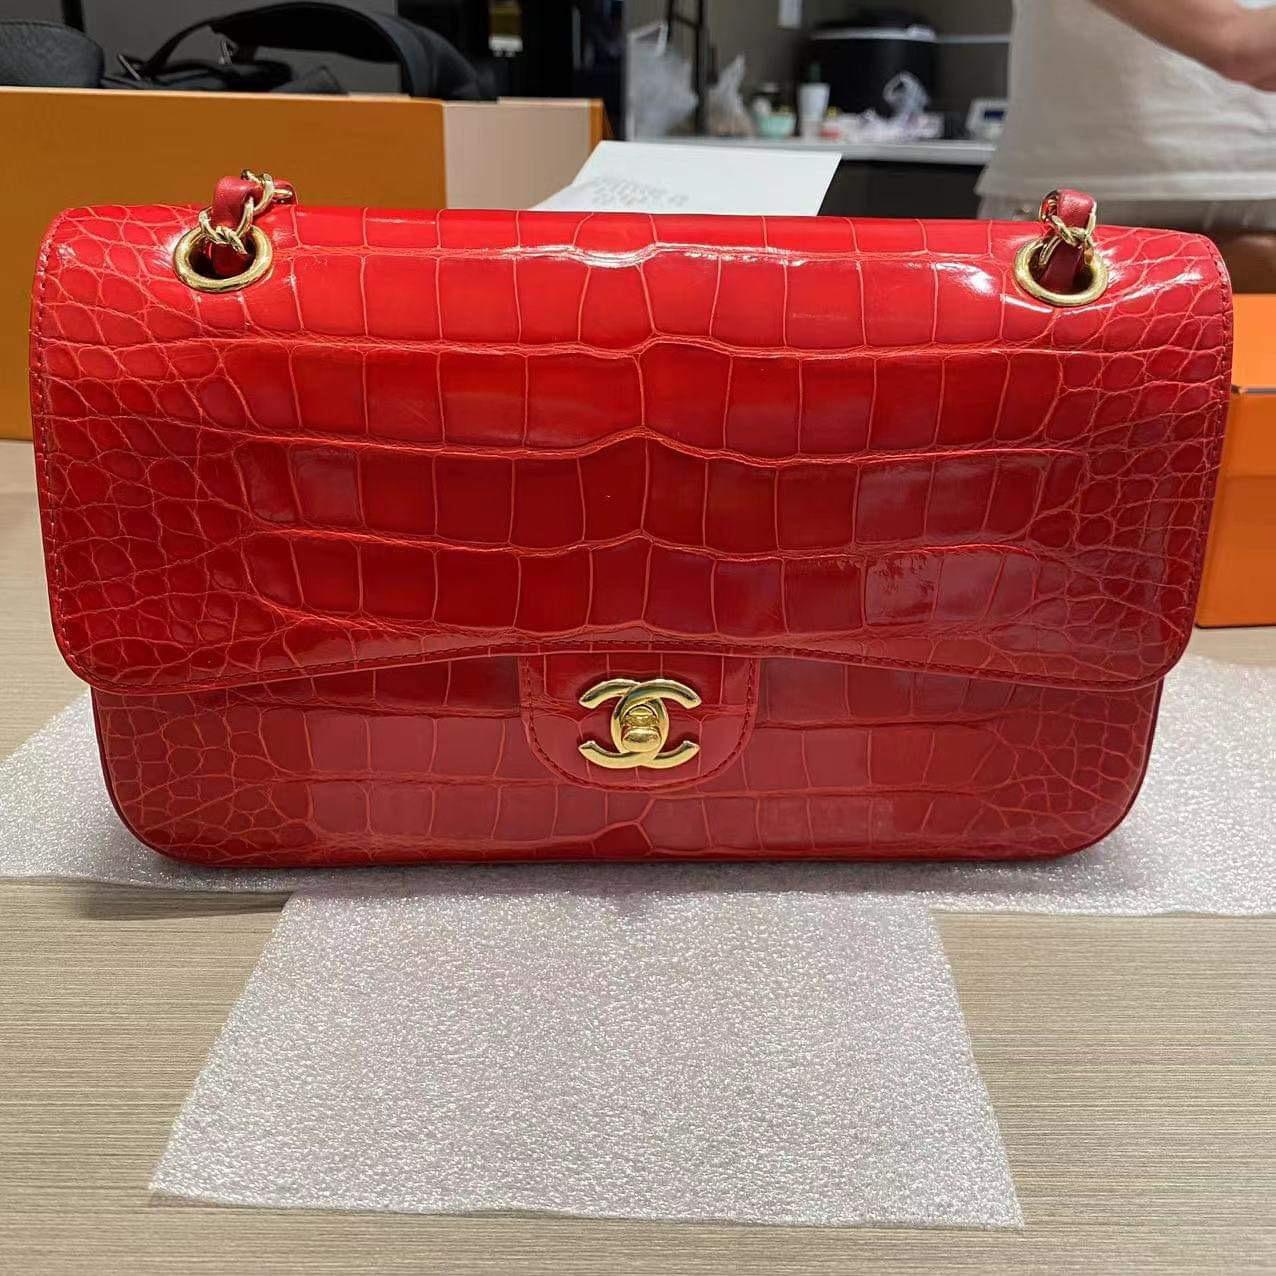 Chanel Medium Double Flap bag in shiny red alligator with gold hardware  For Sale 7